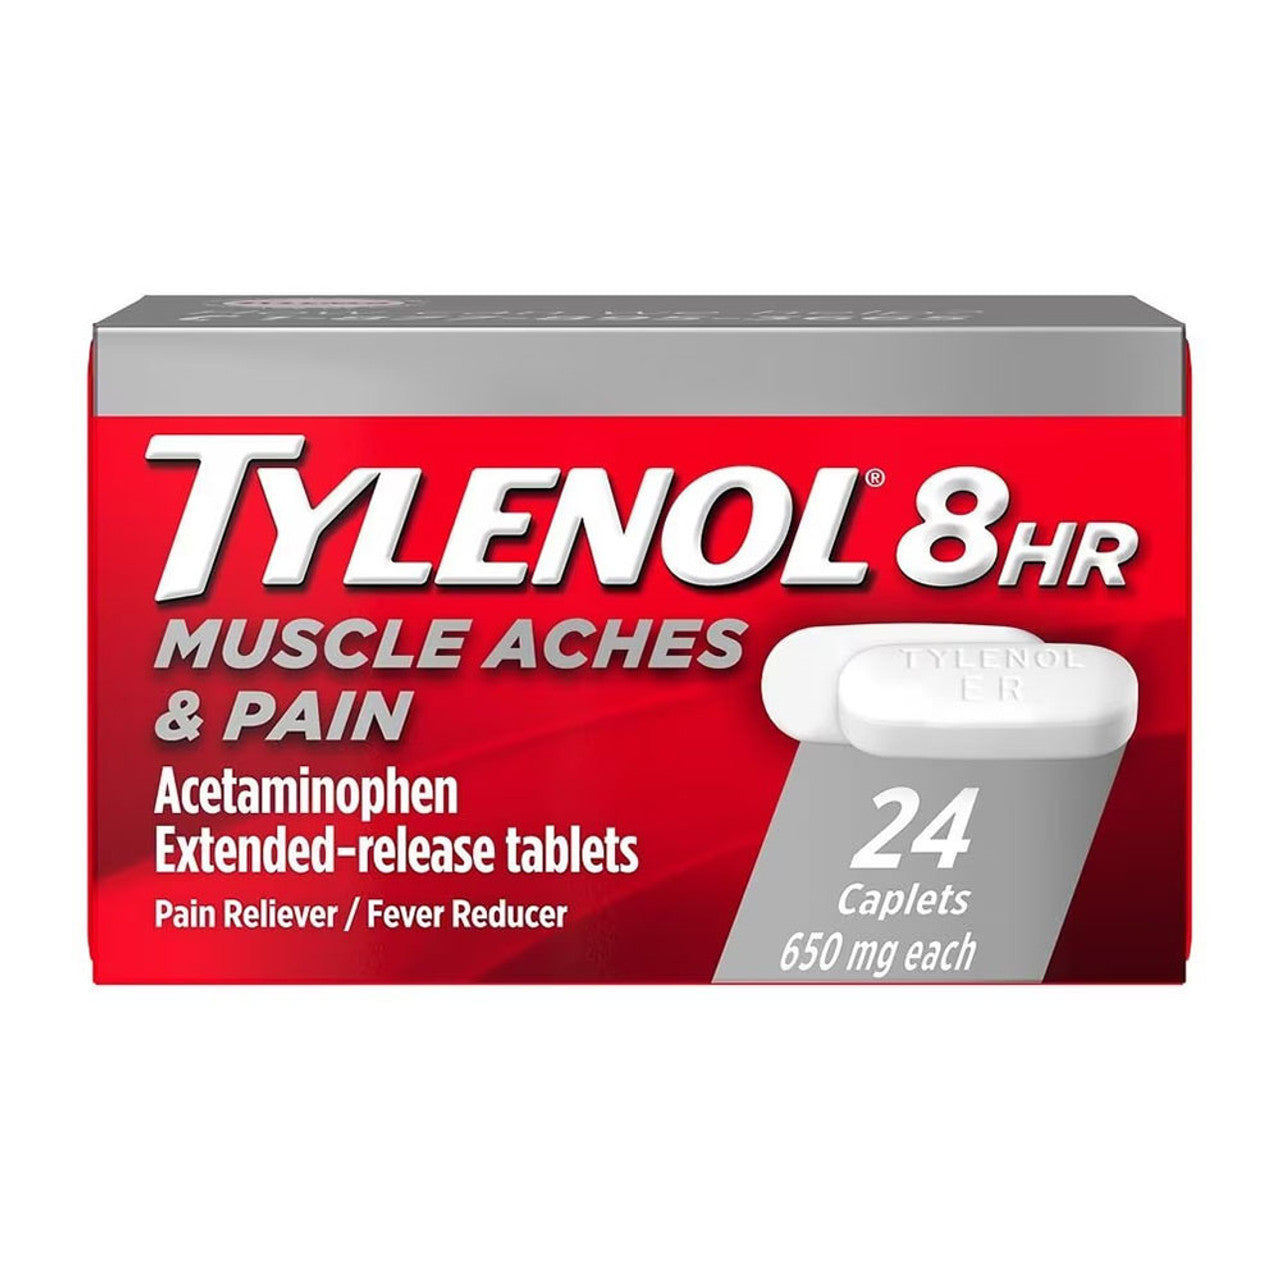 Tylenol 8 Hr Muscle Aches And Pains Capsules, 24 Ea